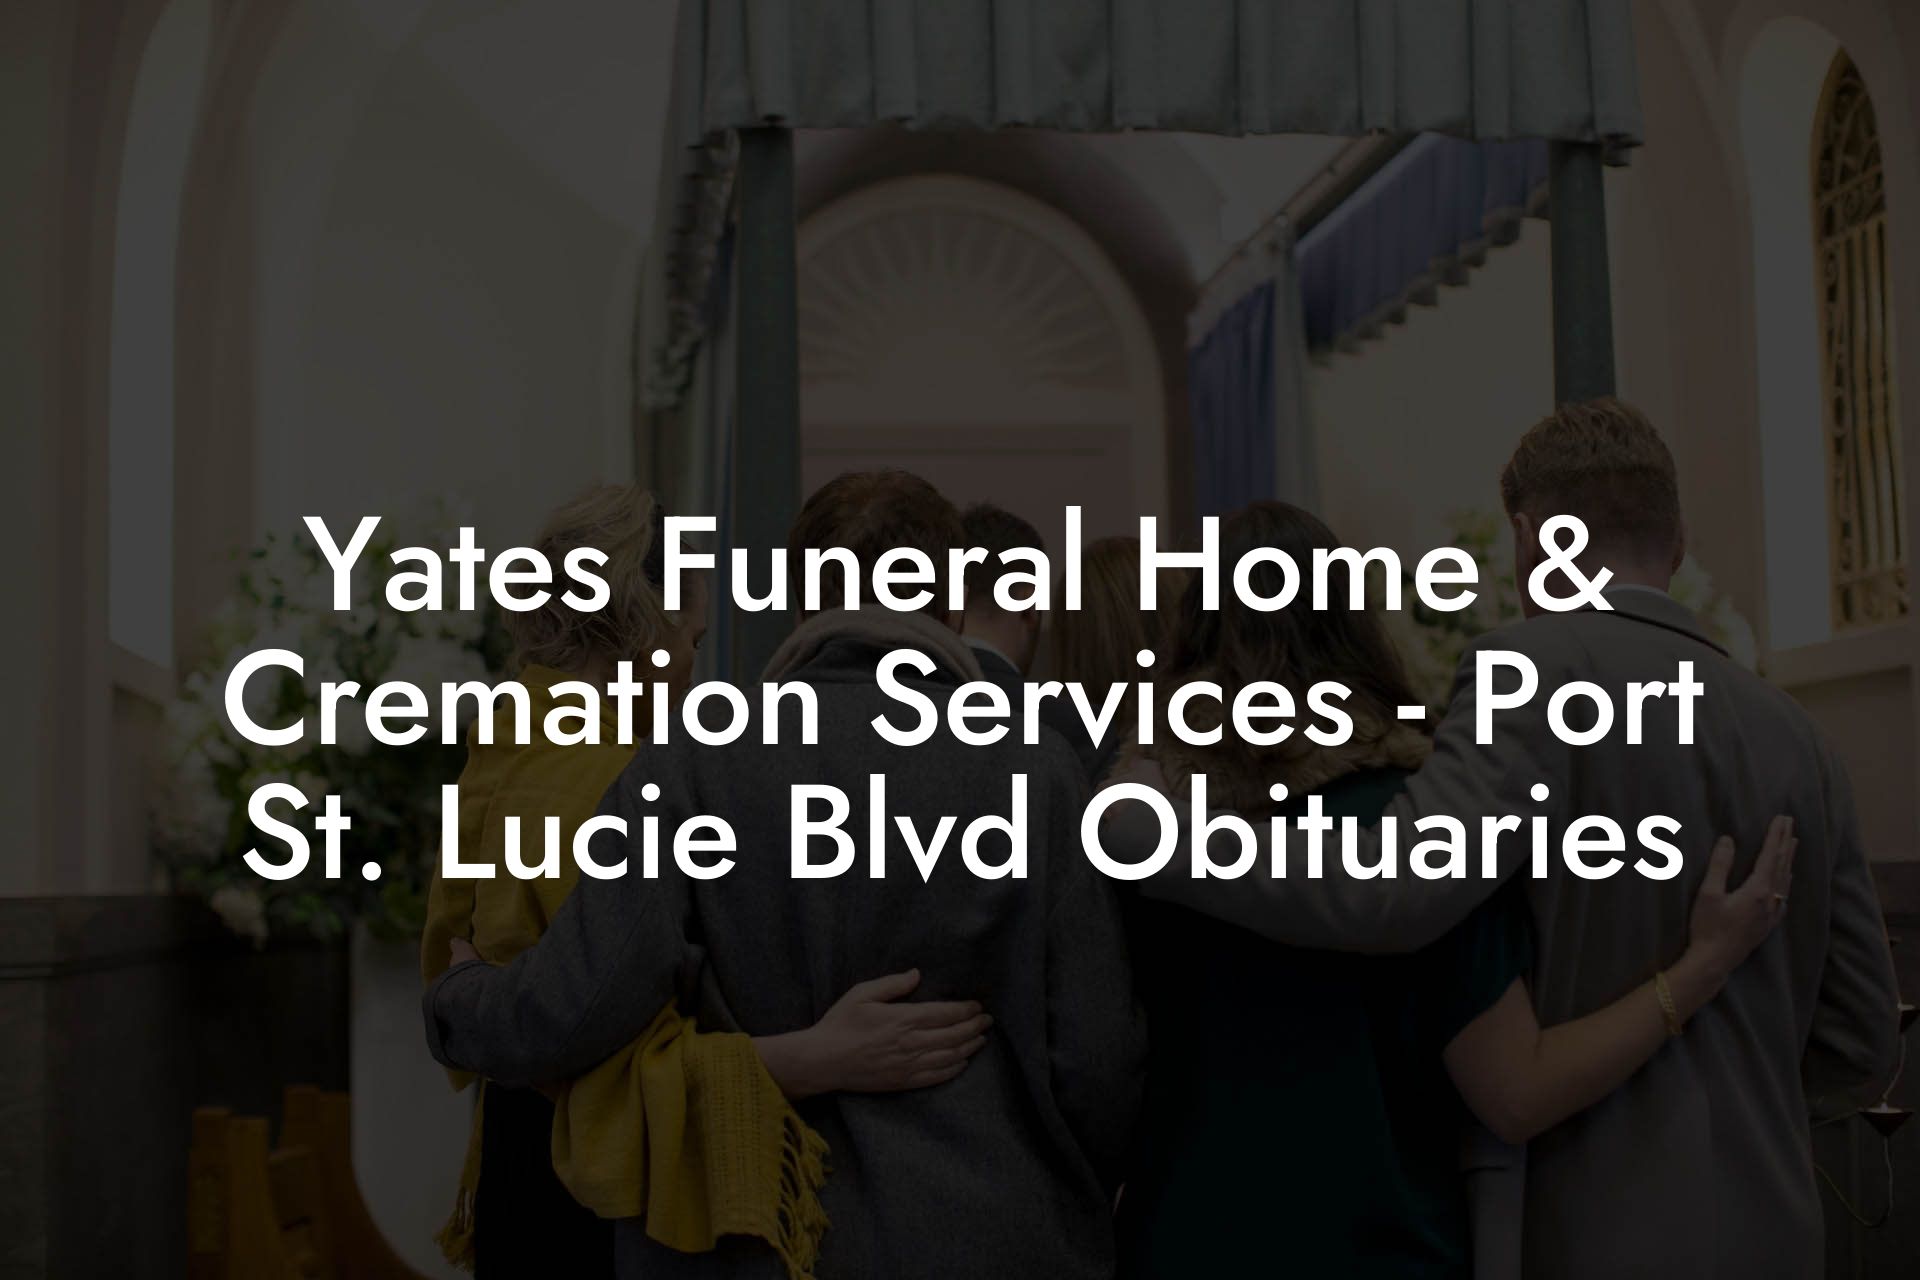 Yates Funeral Home & Cremation Services - Port St. Lucie Blvd Obituaries